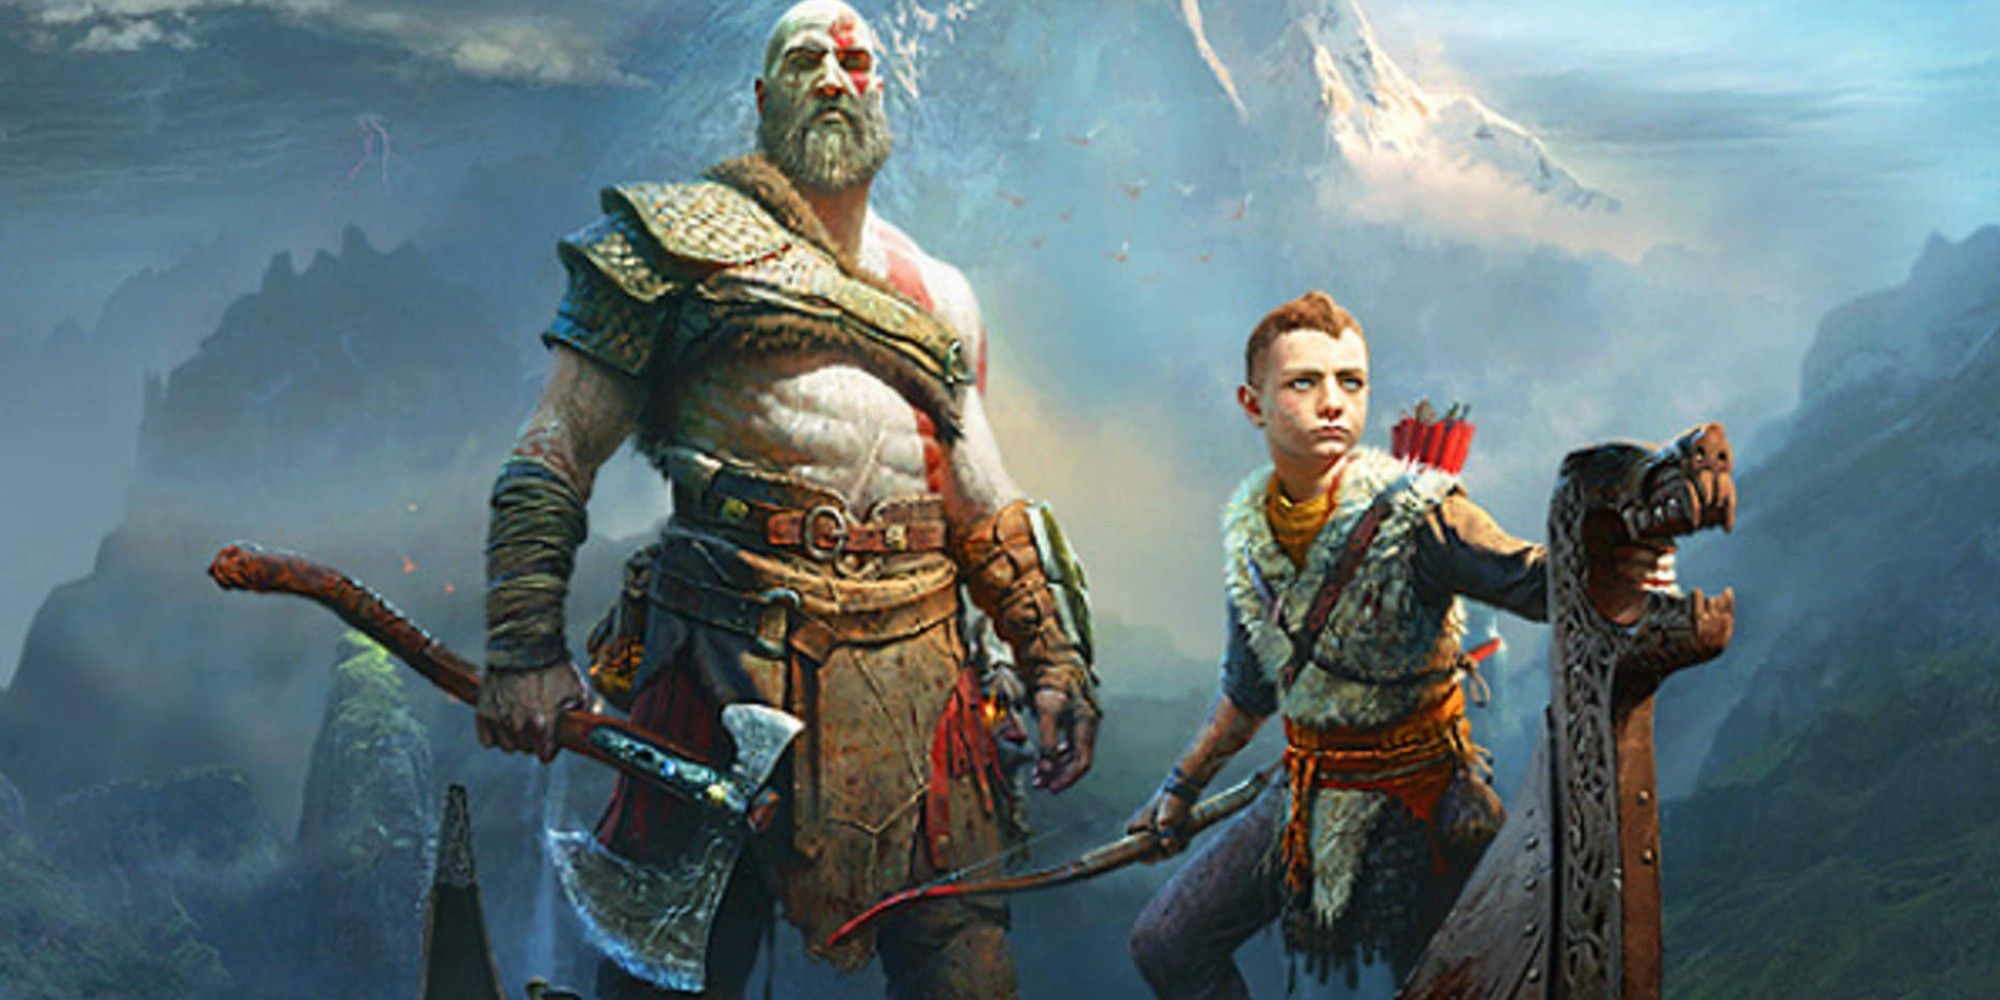 Three mythological realms the God of War games could explore next